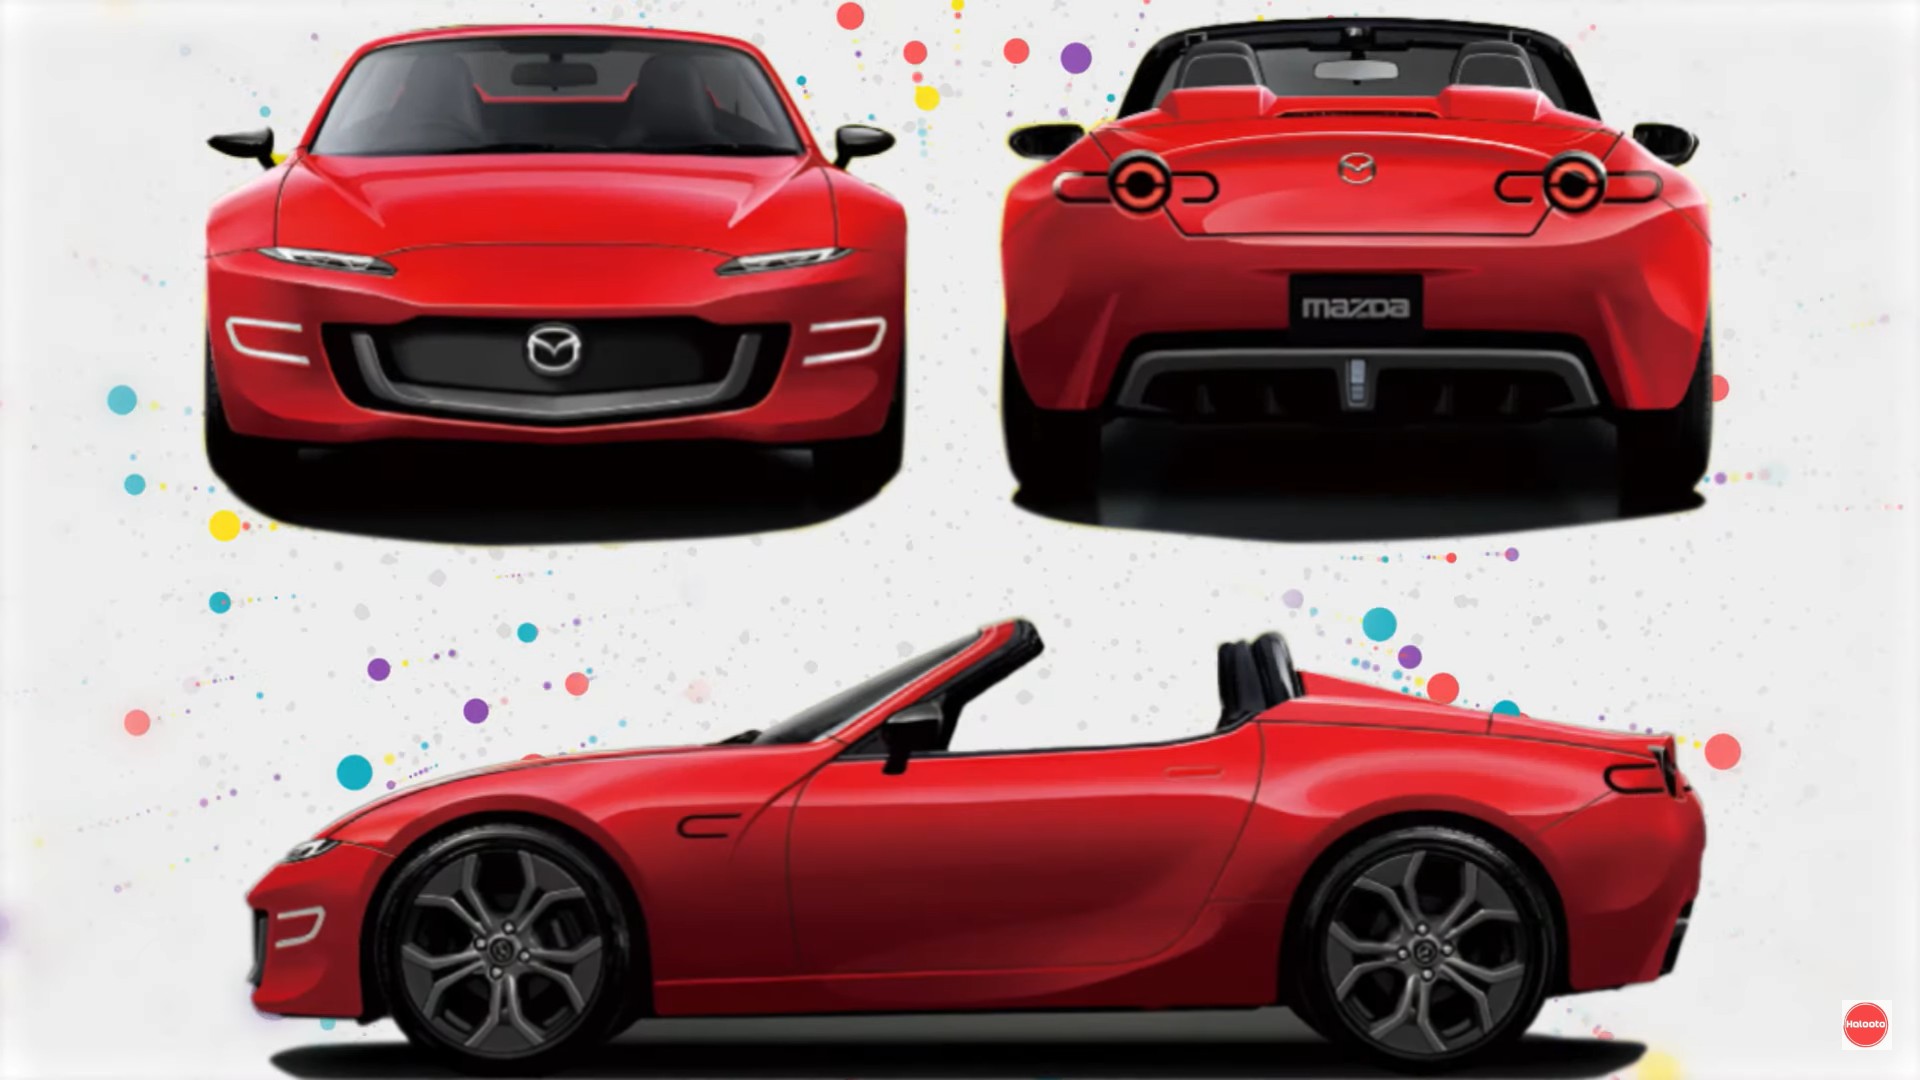 2024 Mazda Mx 5 Miata Gets Envisioned Both As A Redesign And All New Generation 217193 1 